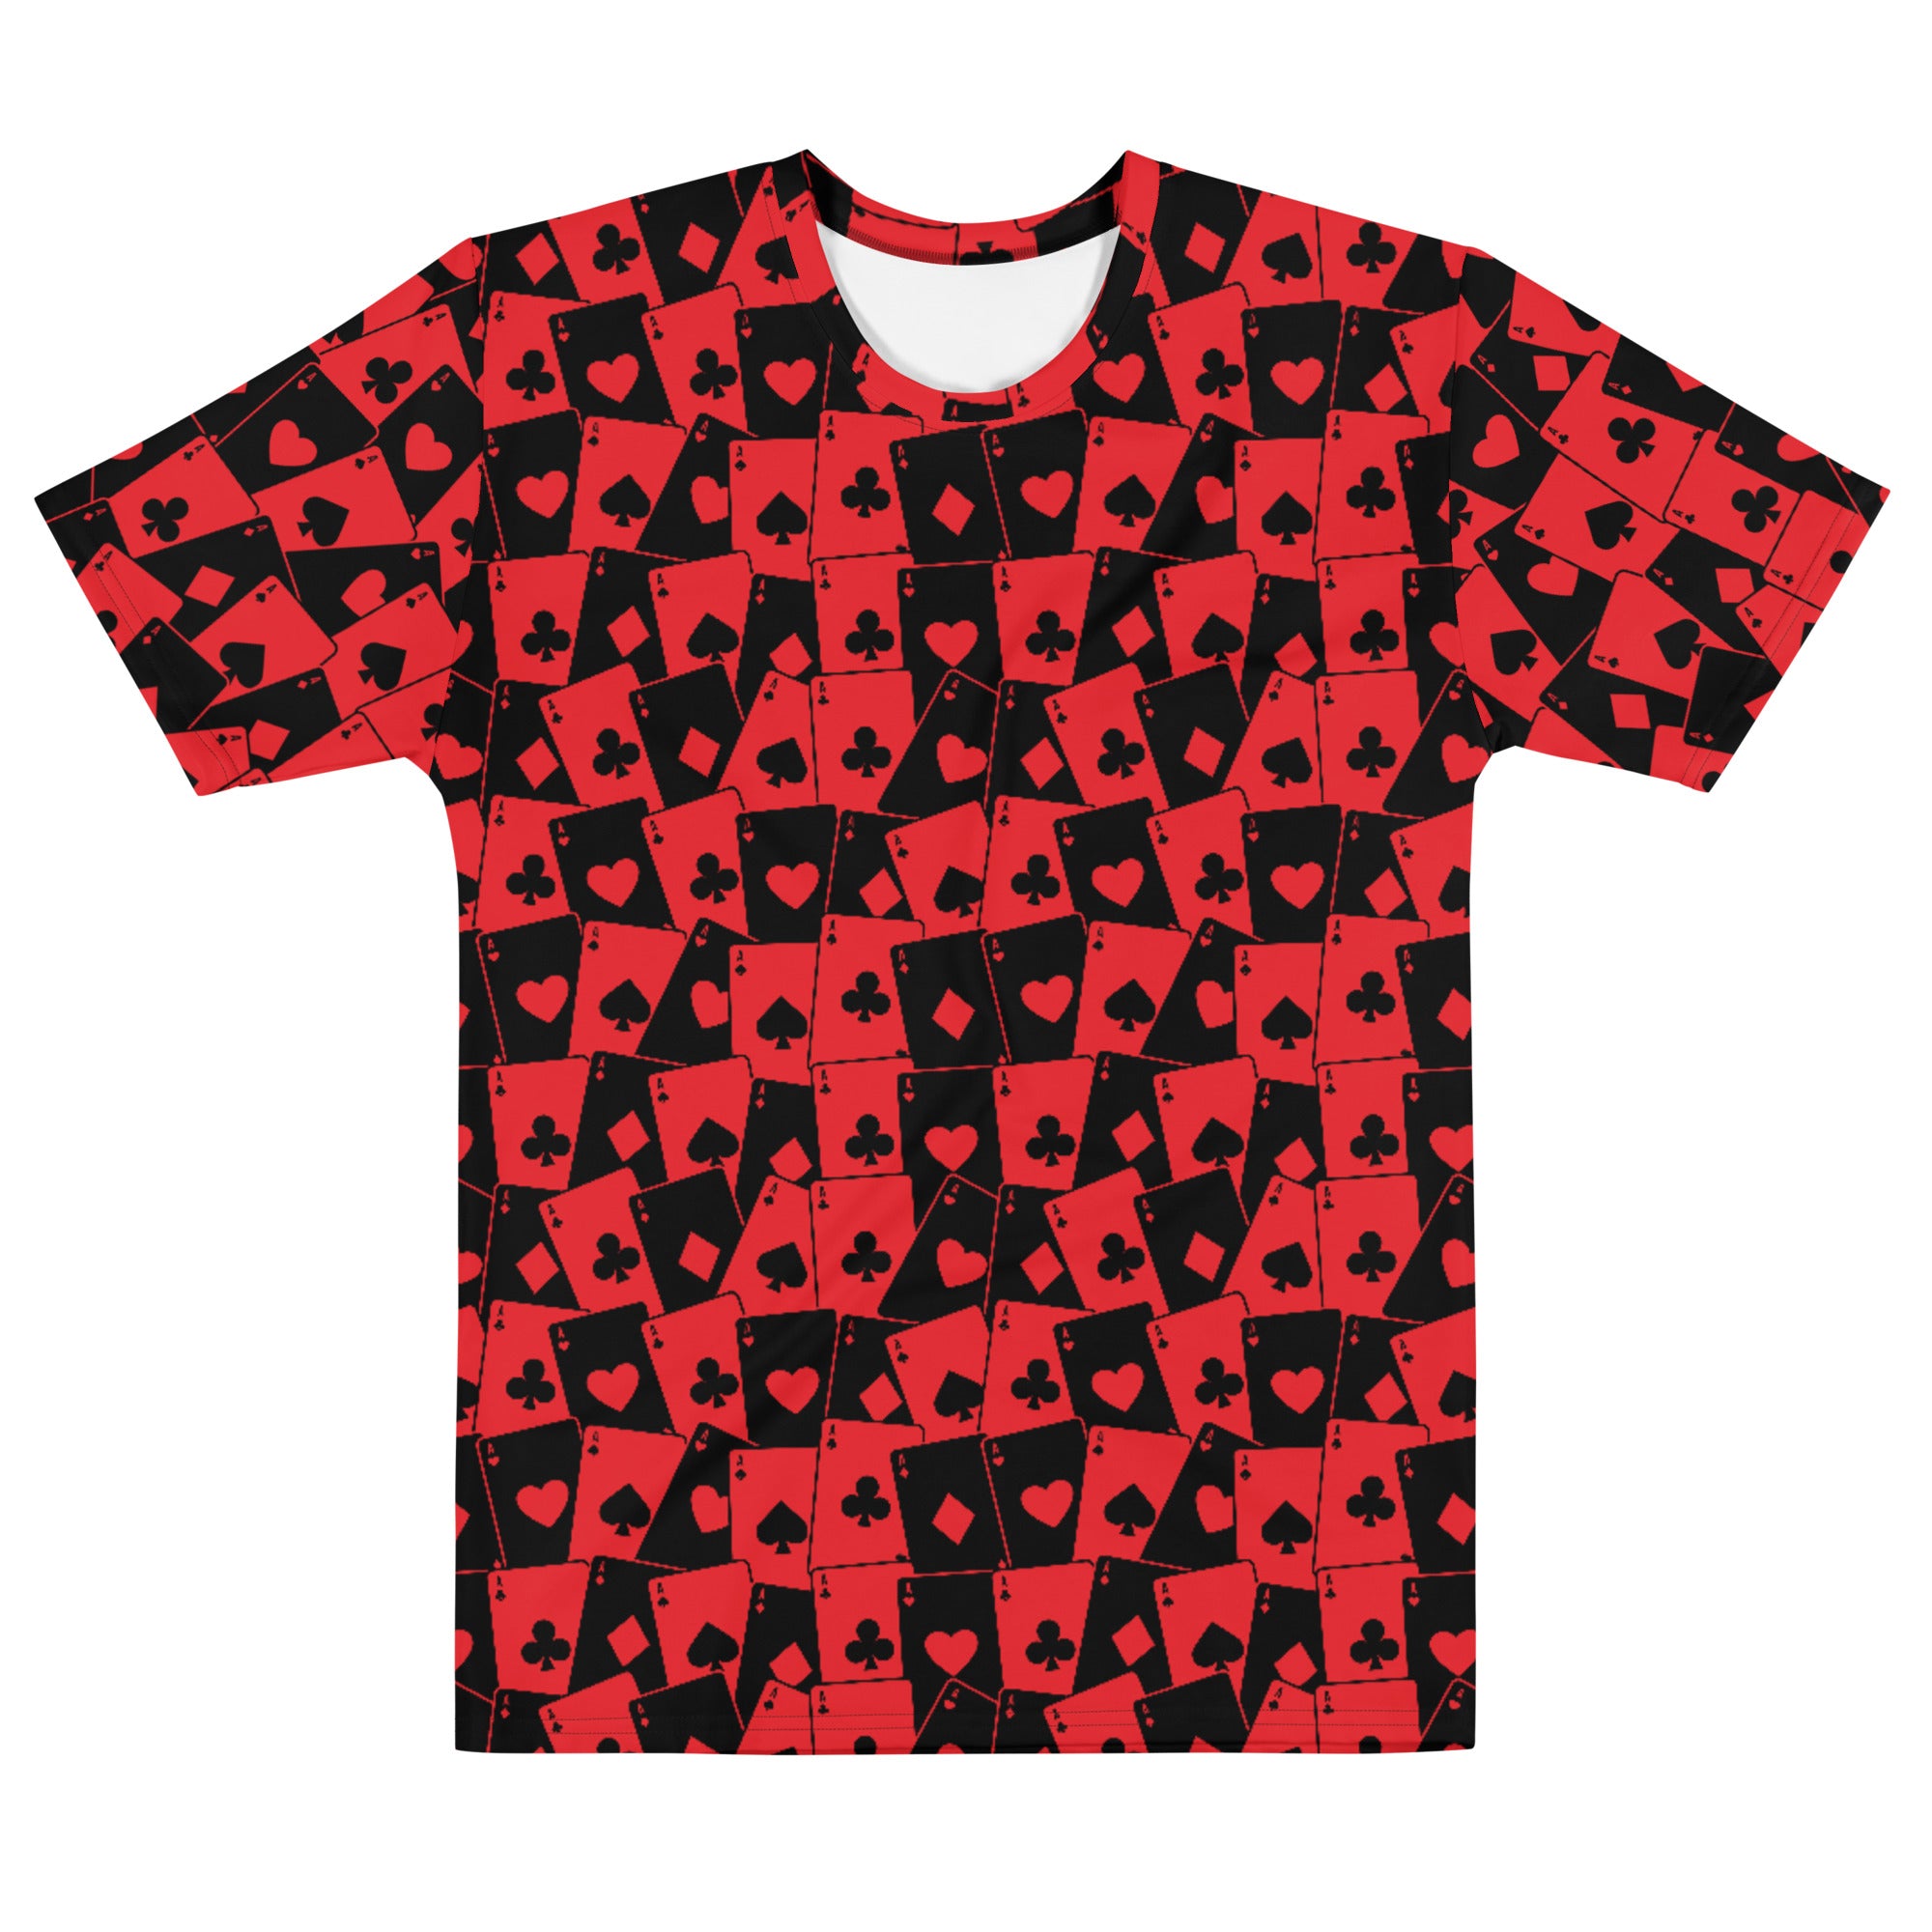 Ace Of Hearts T-Shirt, T-Shirt, - One Stop Rave